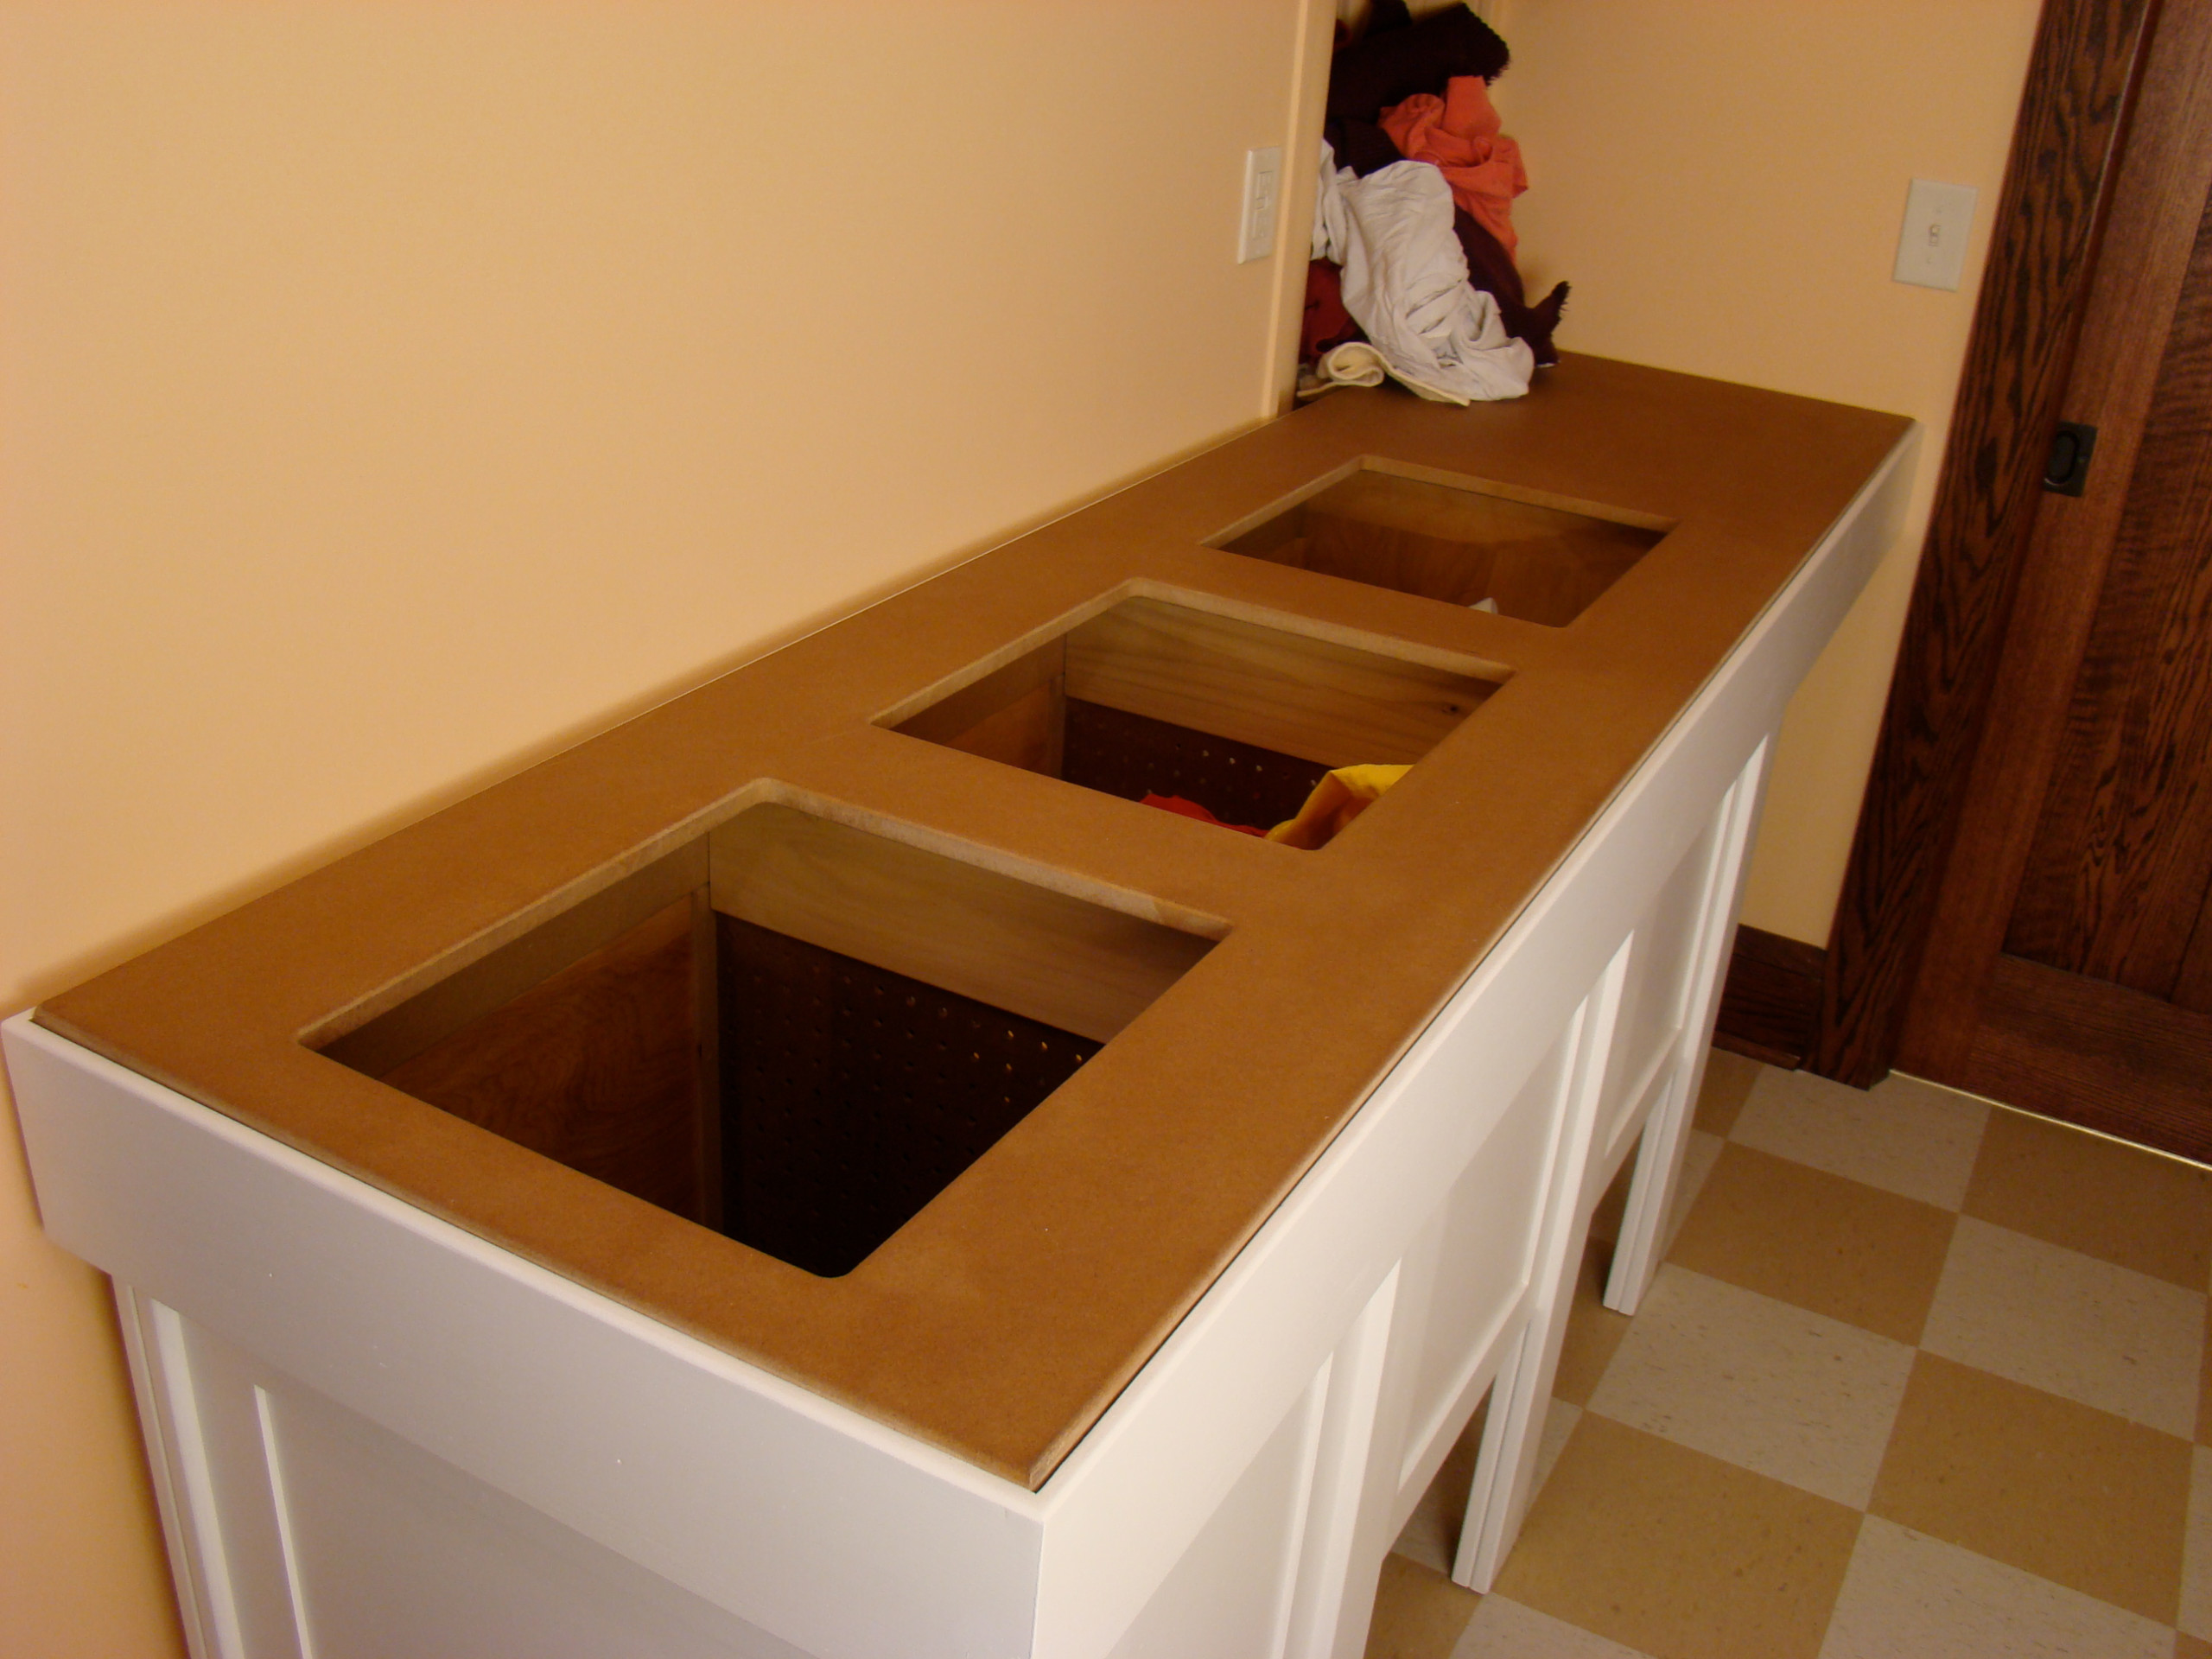 Laundry Room sorting table